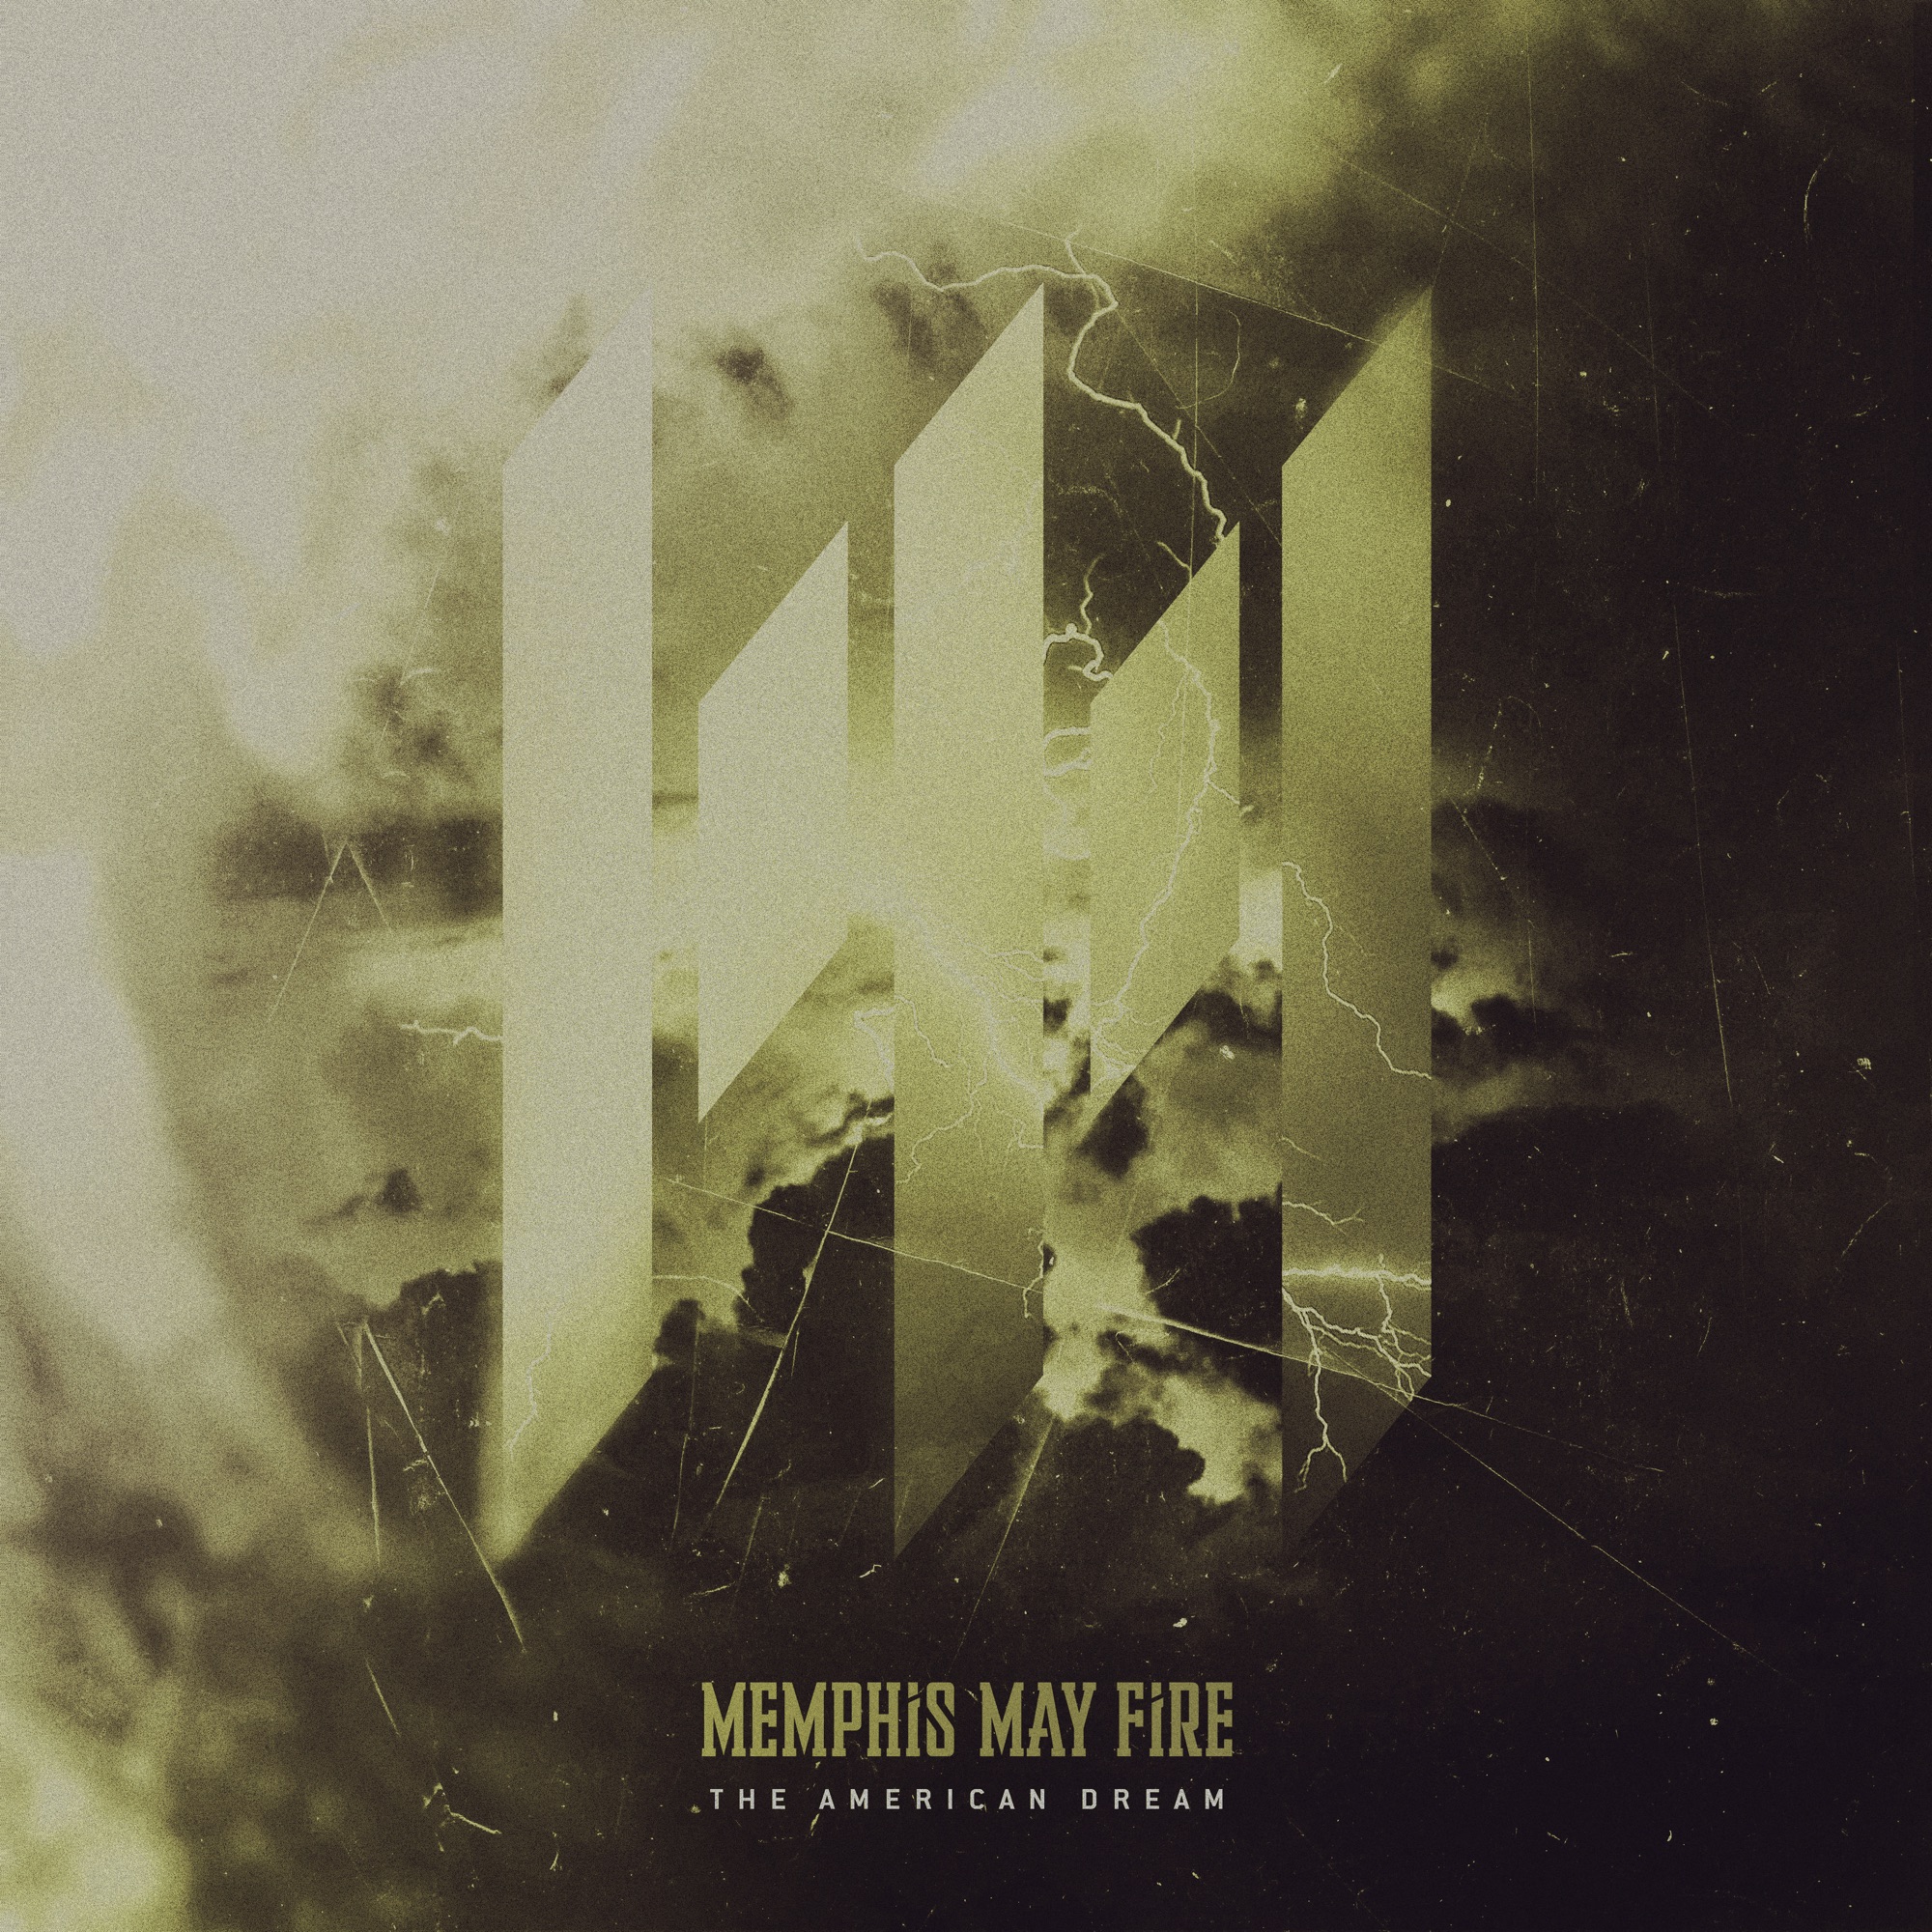 Art for The American Dream by Memphis May Fire